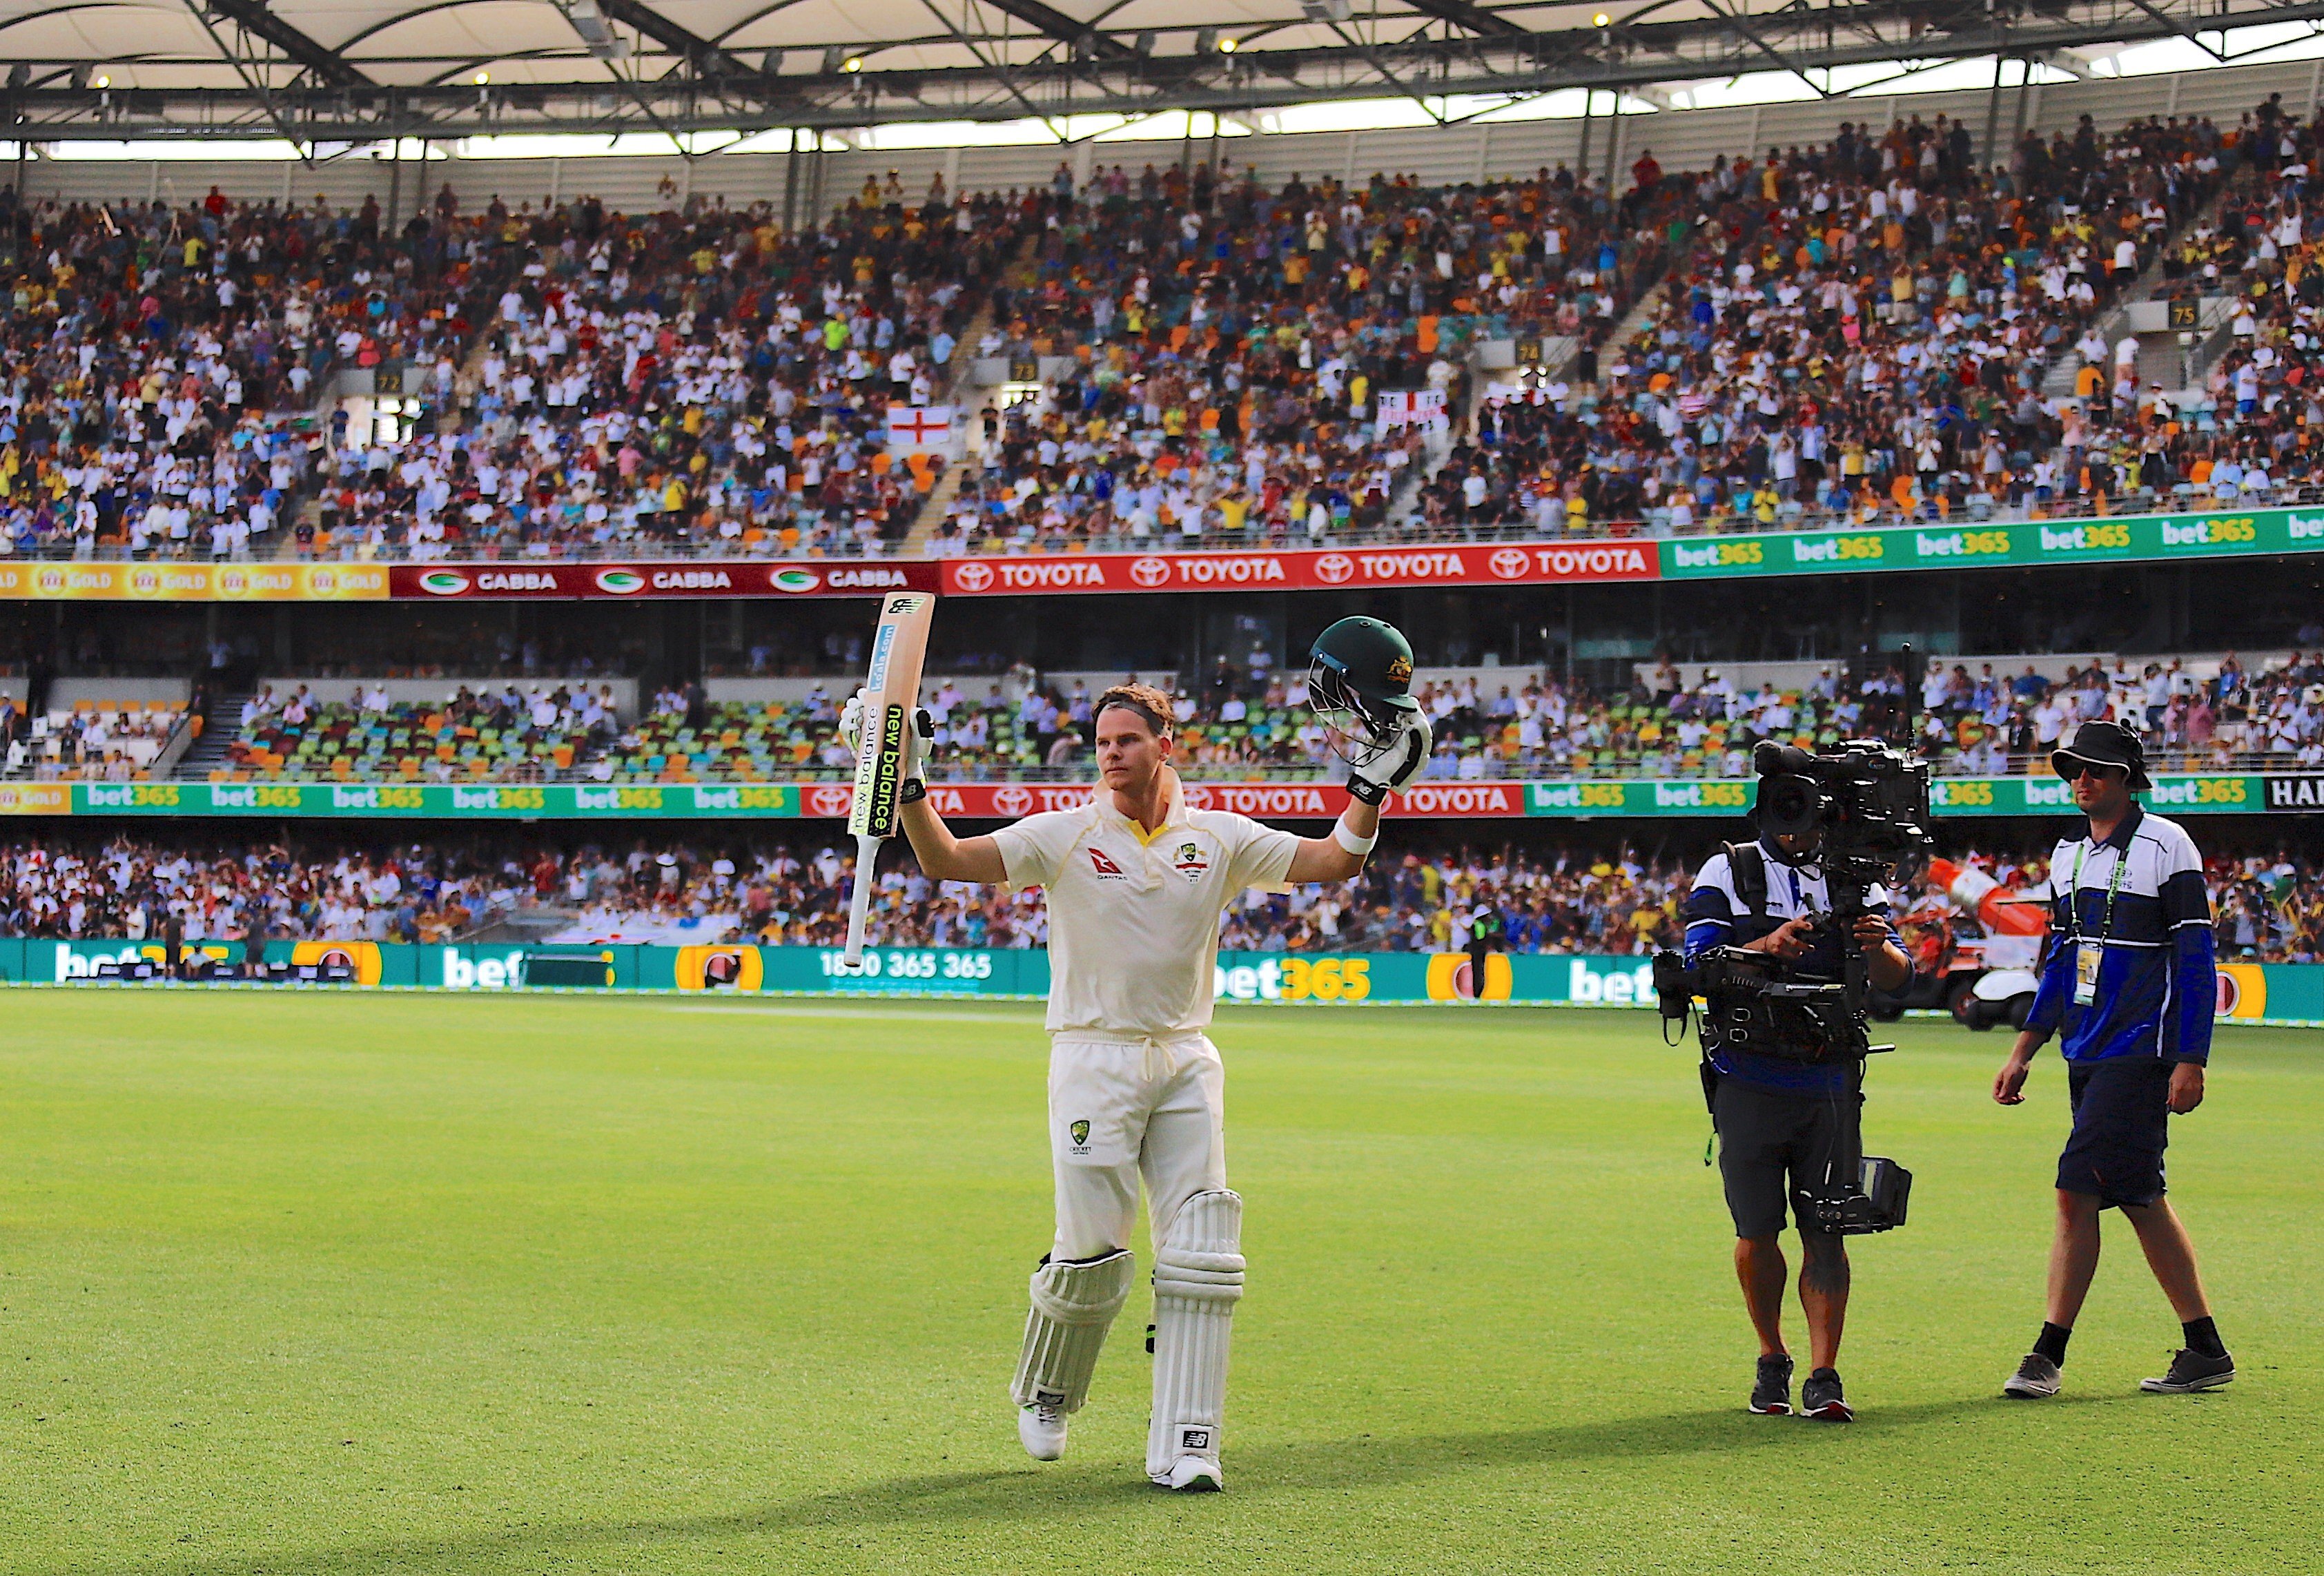 Steve Smith walks off at the end of Australia’s innings after an unbeaten 141. Photo: Reuters